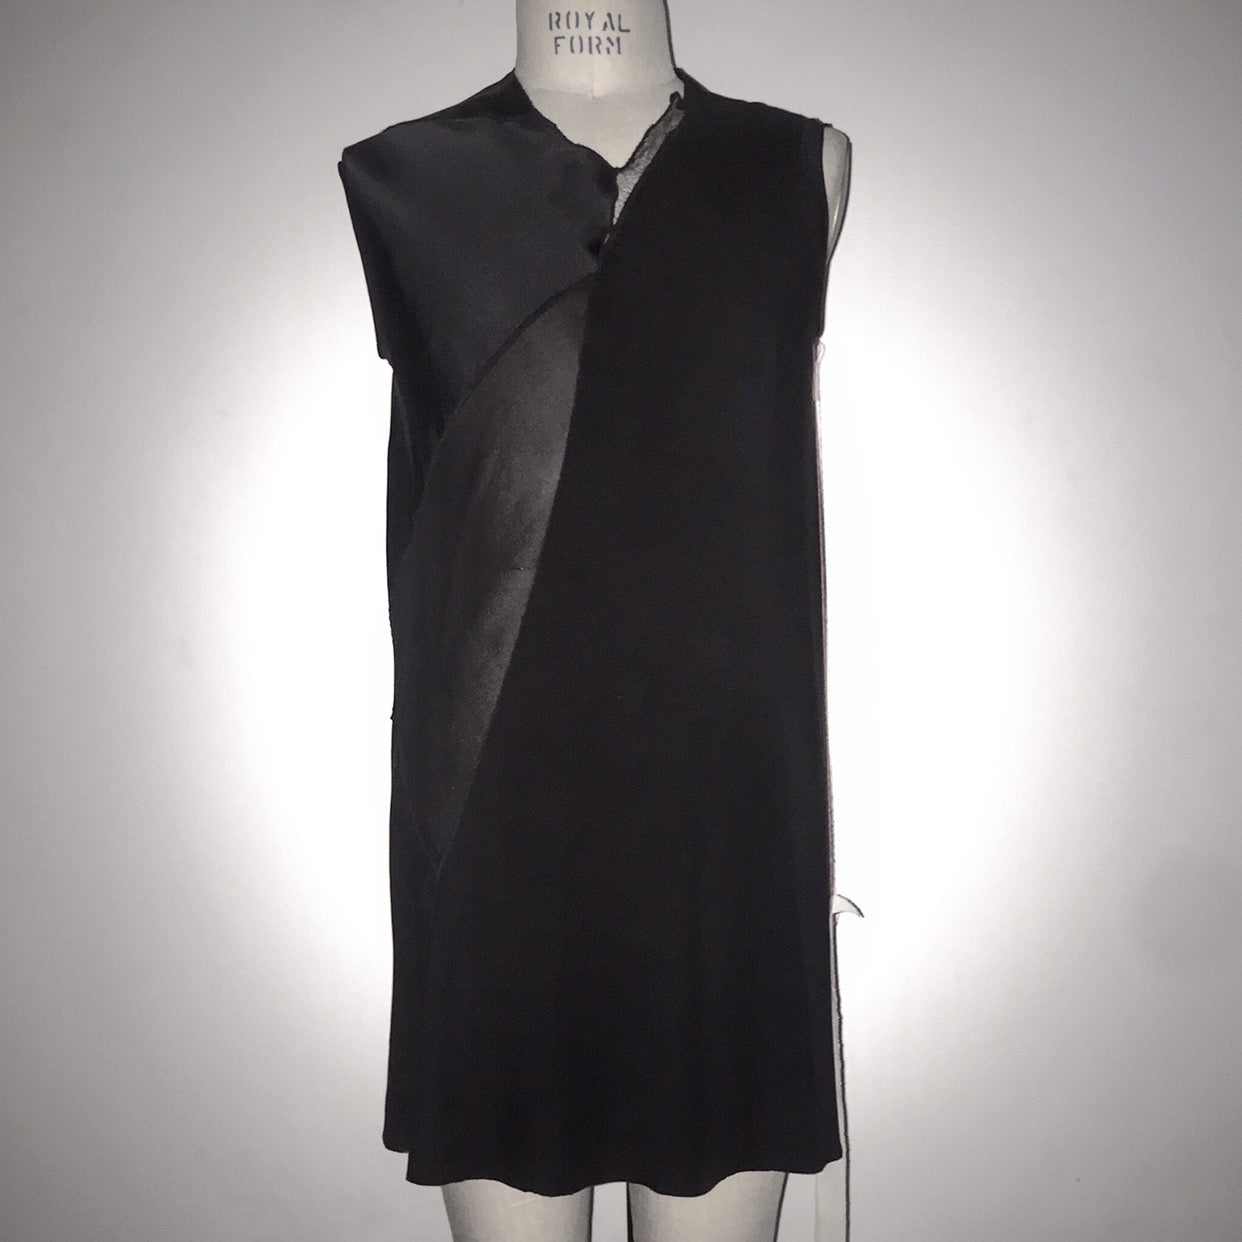 agender | kammacloth...one of a kind...medium, uni-spiral sleeveless tunic... ready to buy